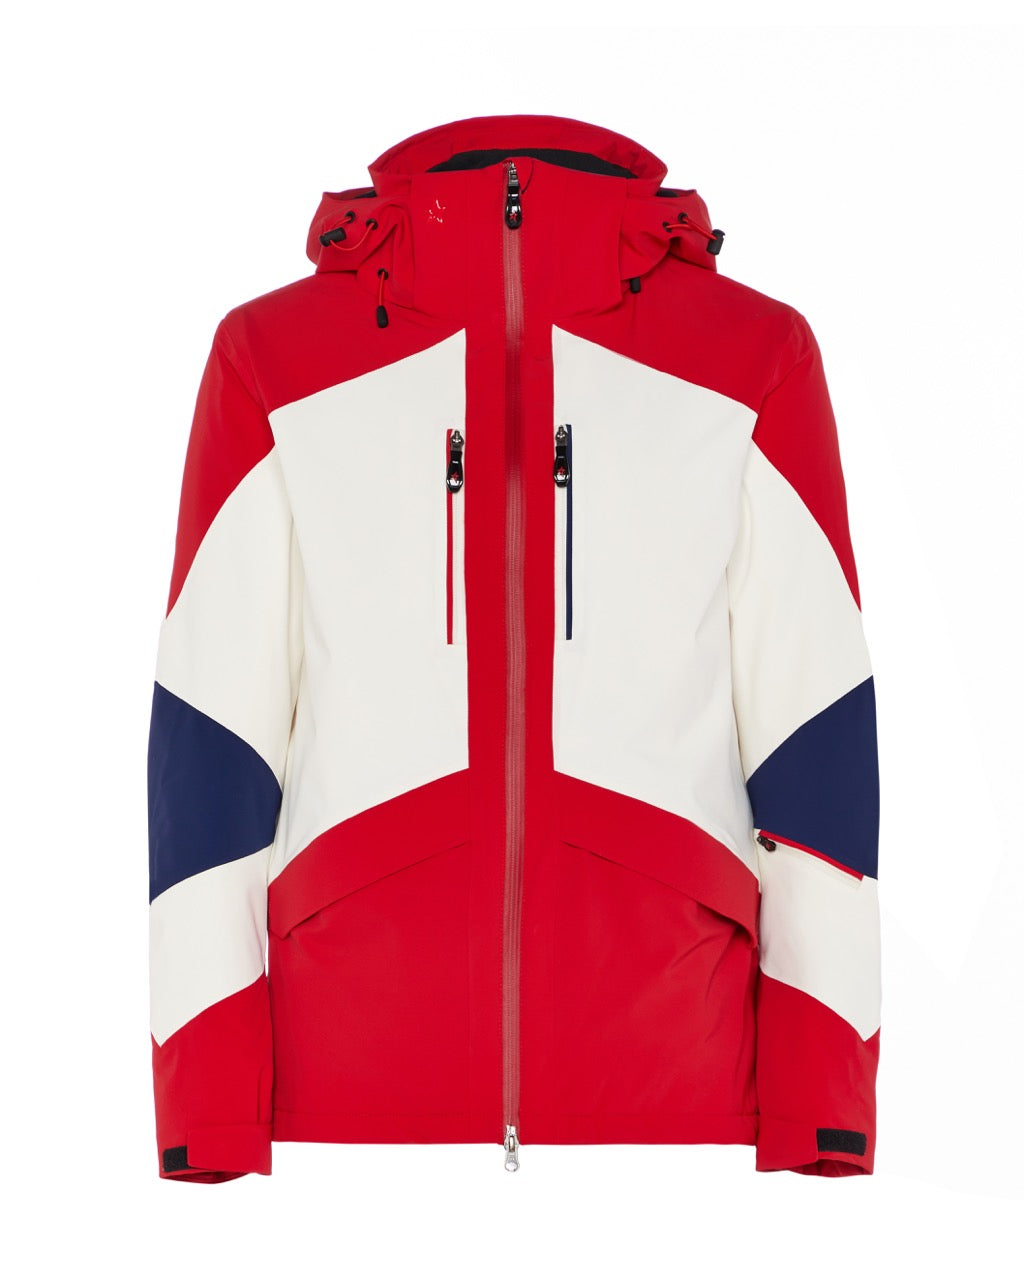 Perfect Moment Men's Chamonix II Jacket in Red, White & Navy